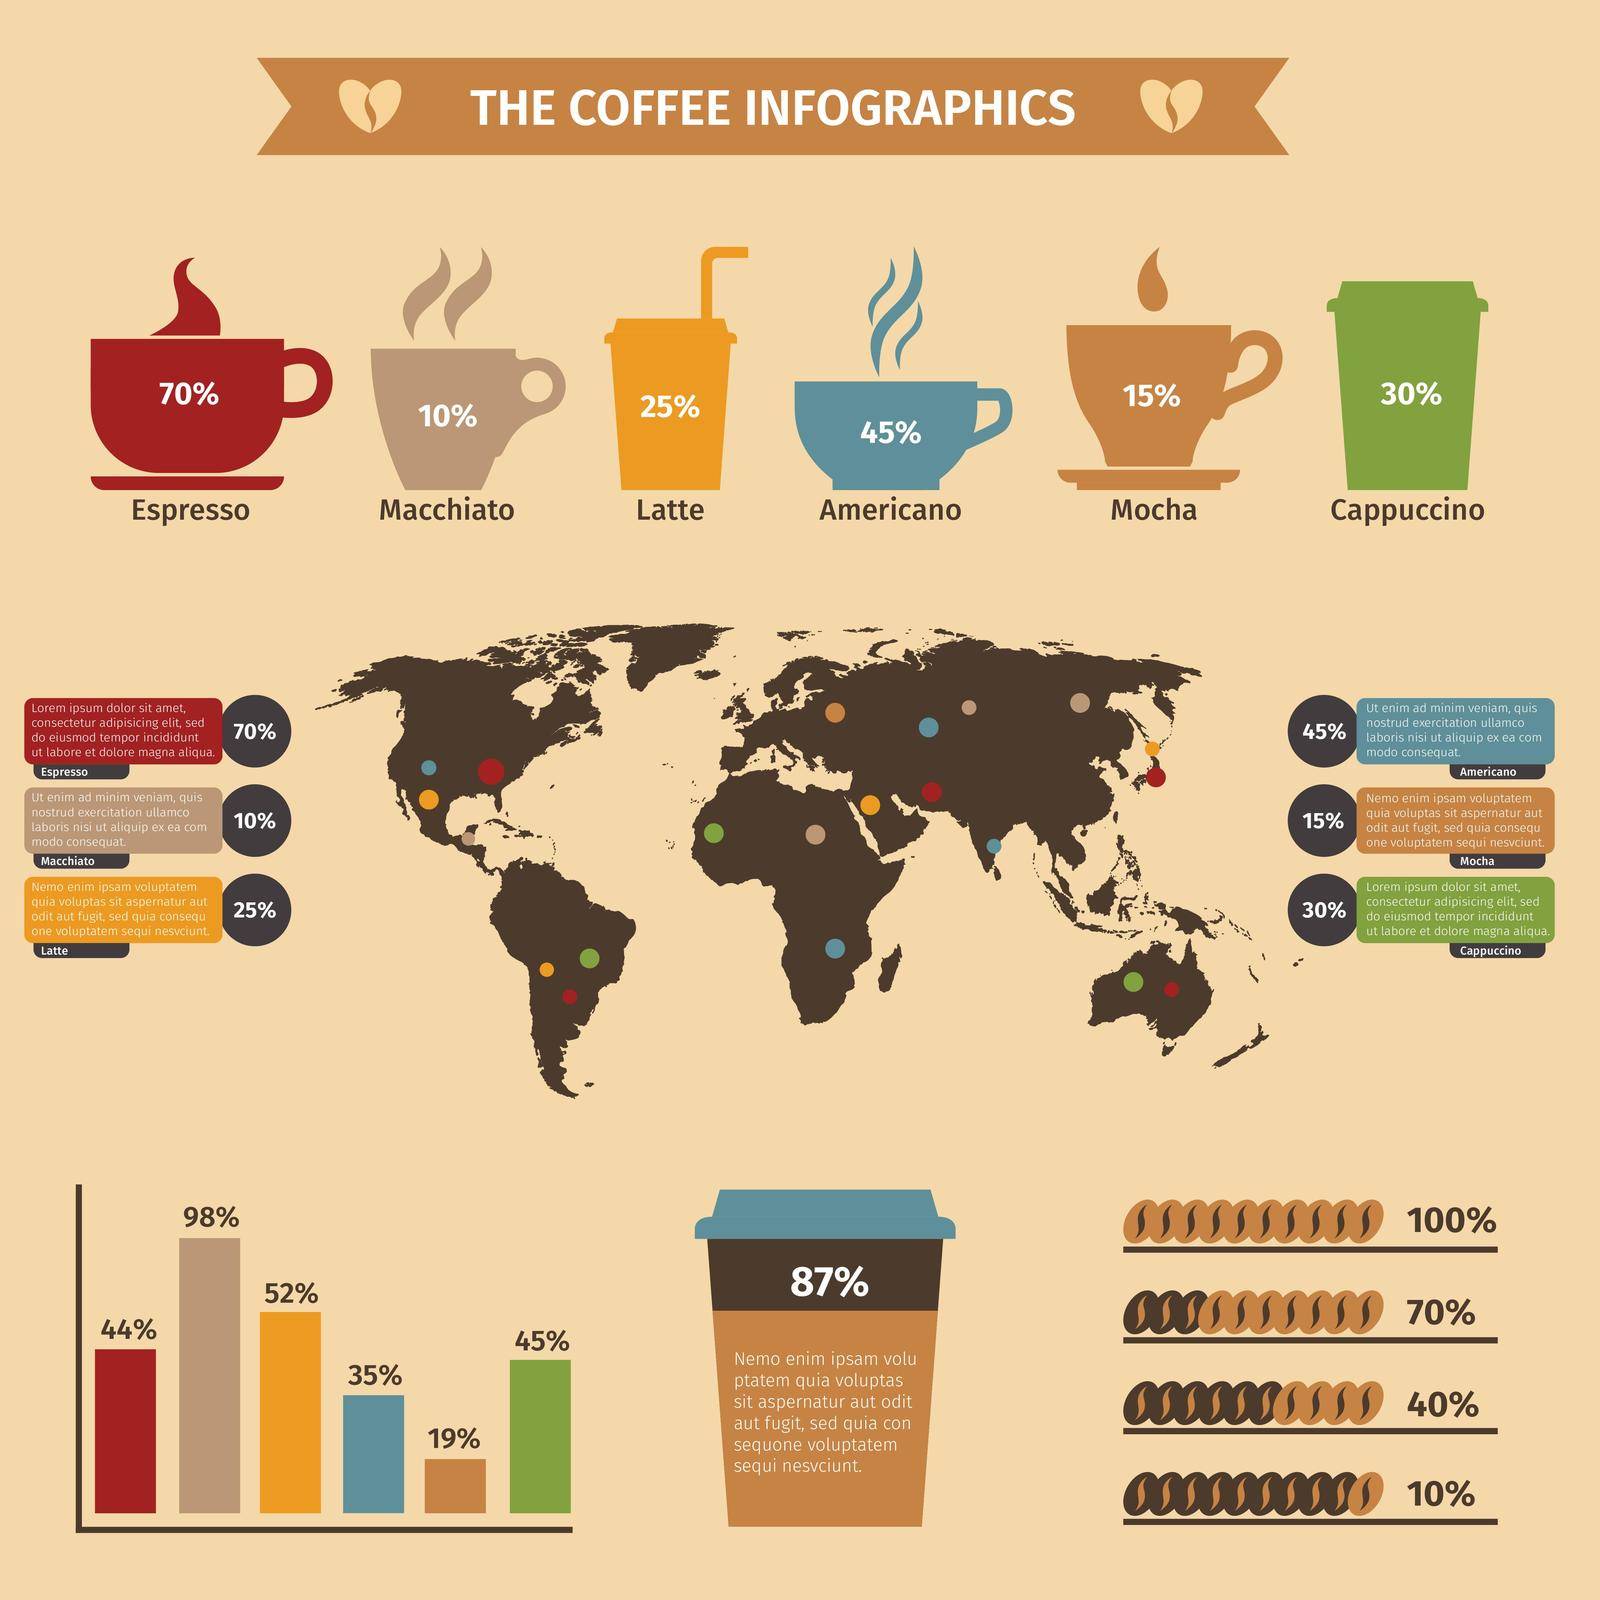 Coffee infographics set with world map and drink types and cups vector illustration